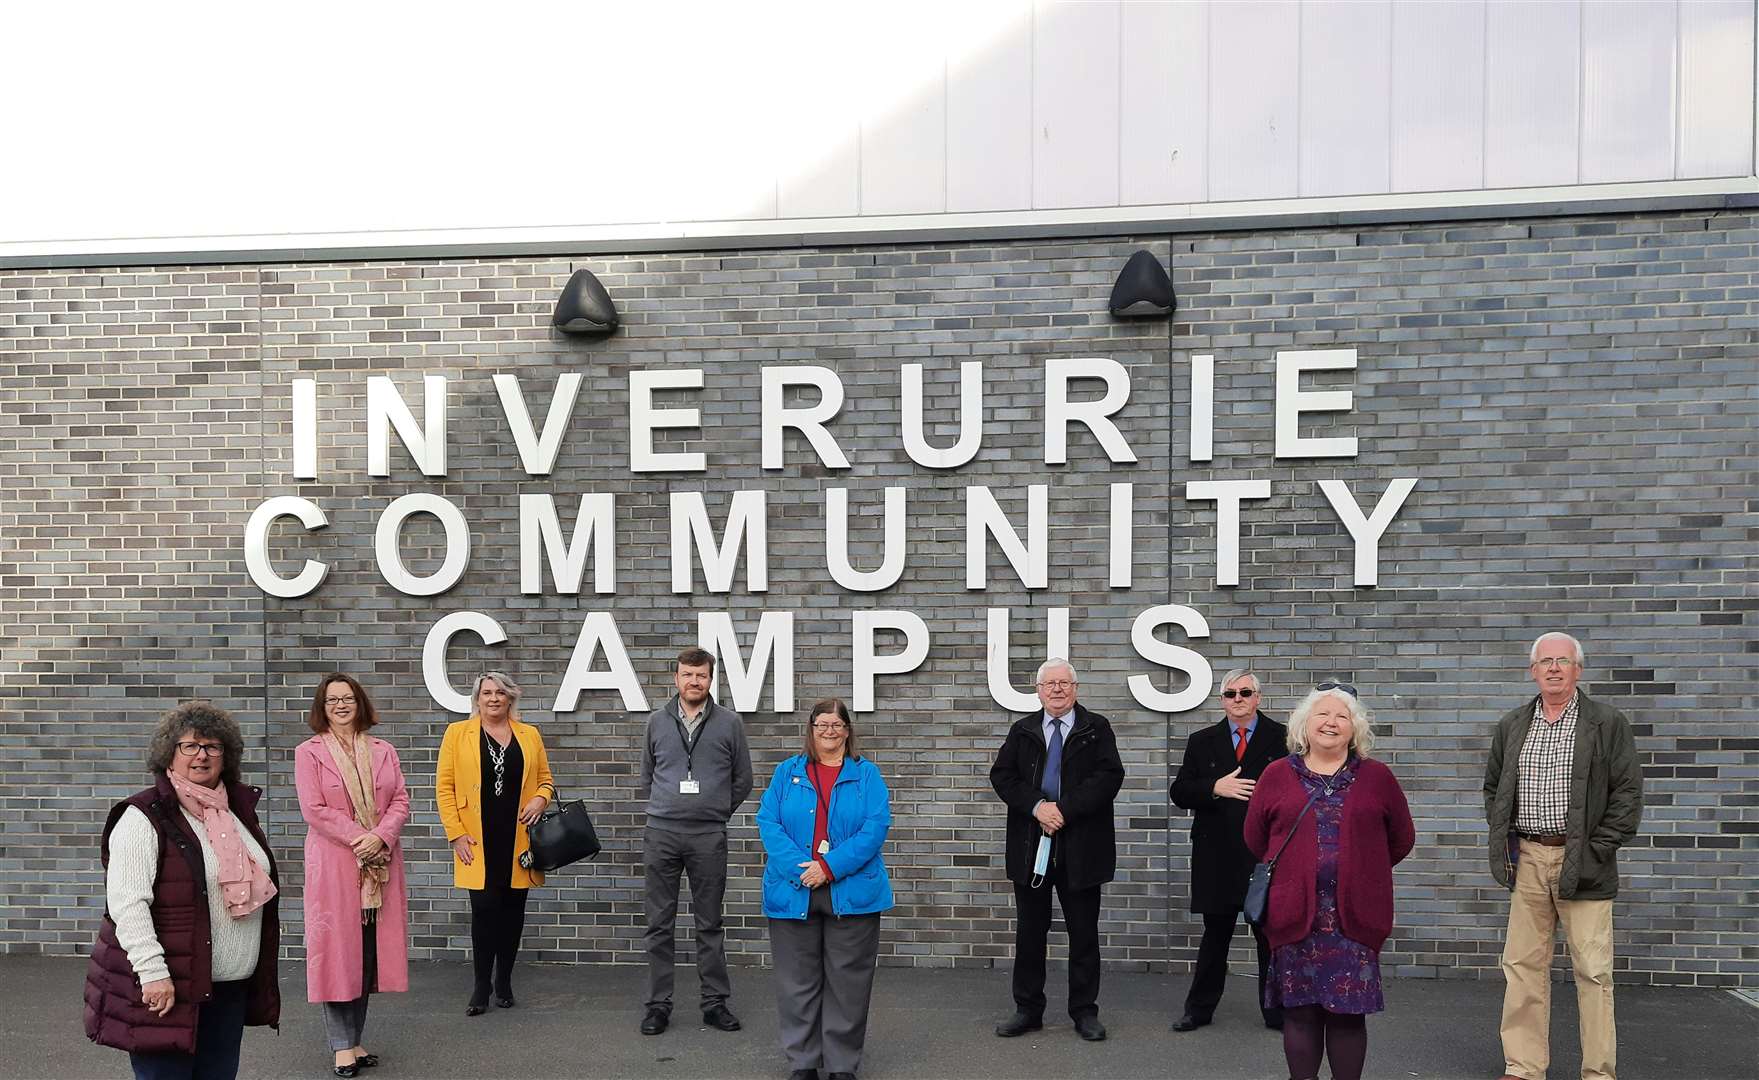 Councillors visited the Inverurie Community Campus to see the facilities.